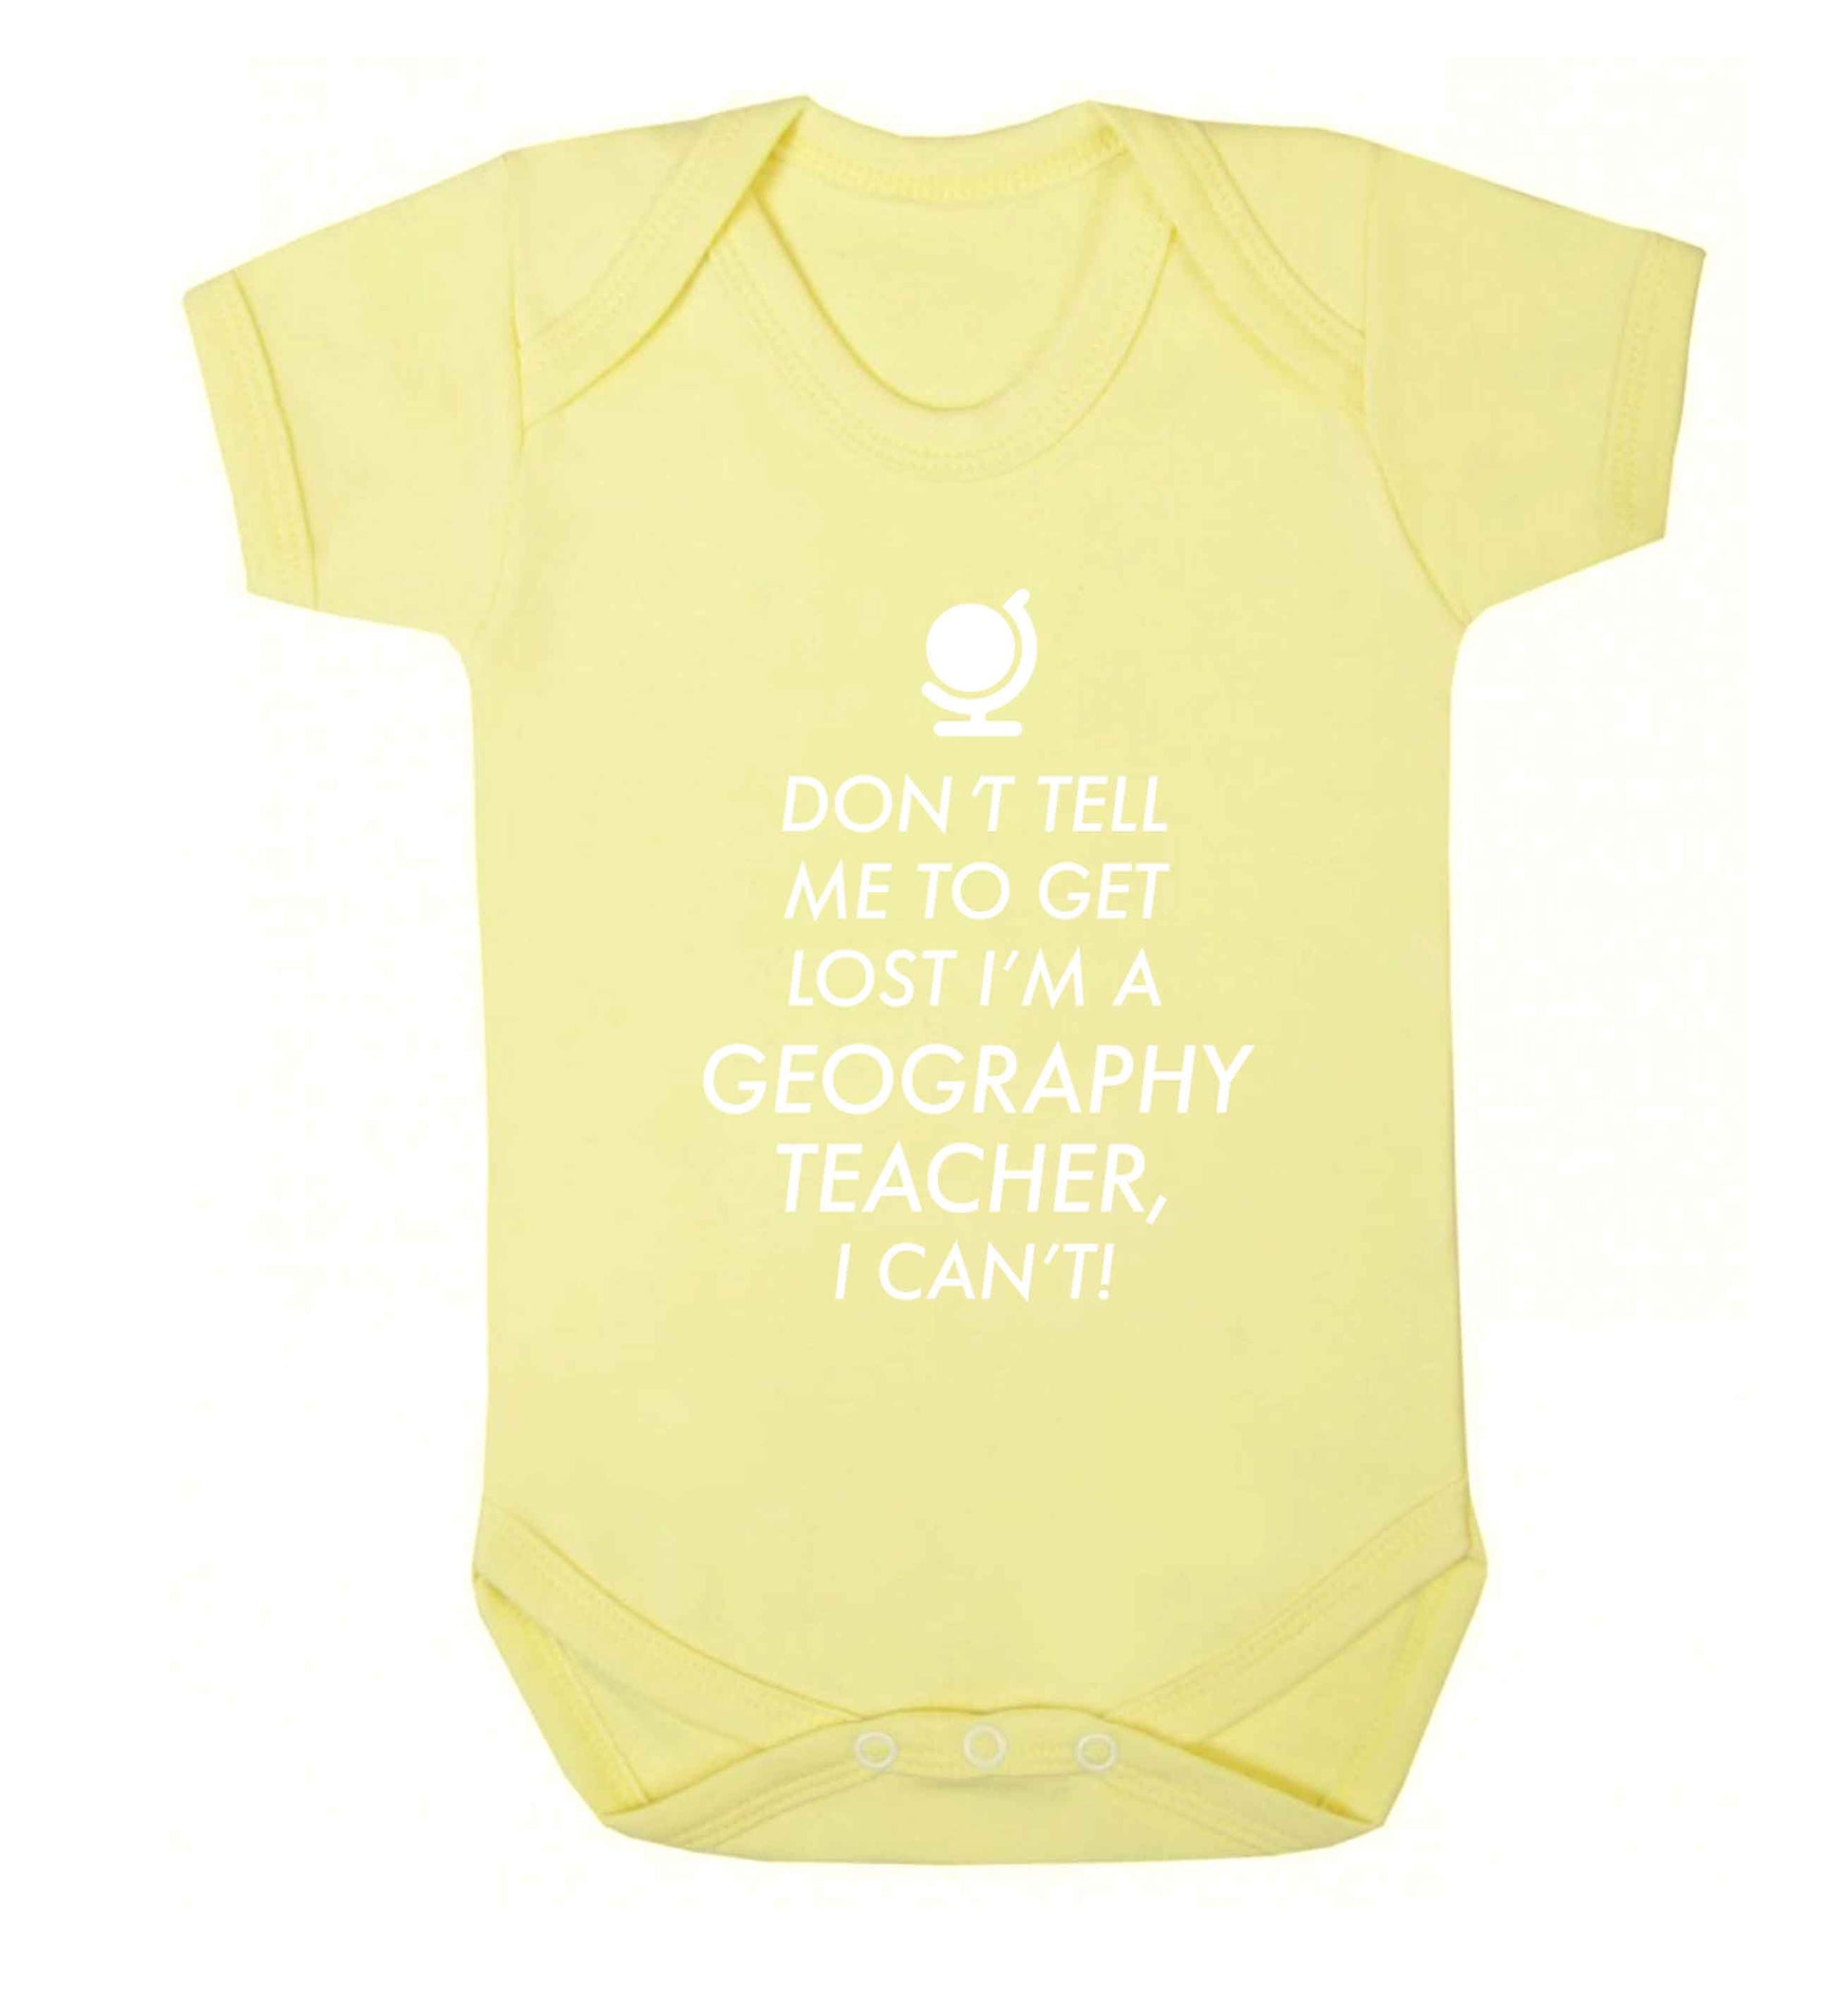 Don't tell me to get lost I'm a geography teacher, I can't Baby Vest pale yellow 18-24 months